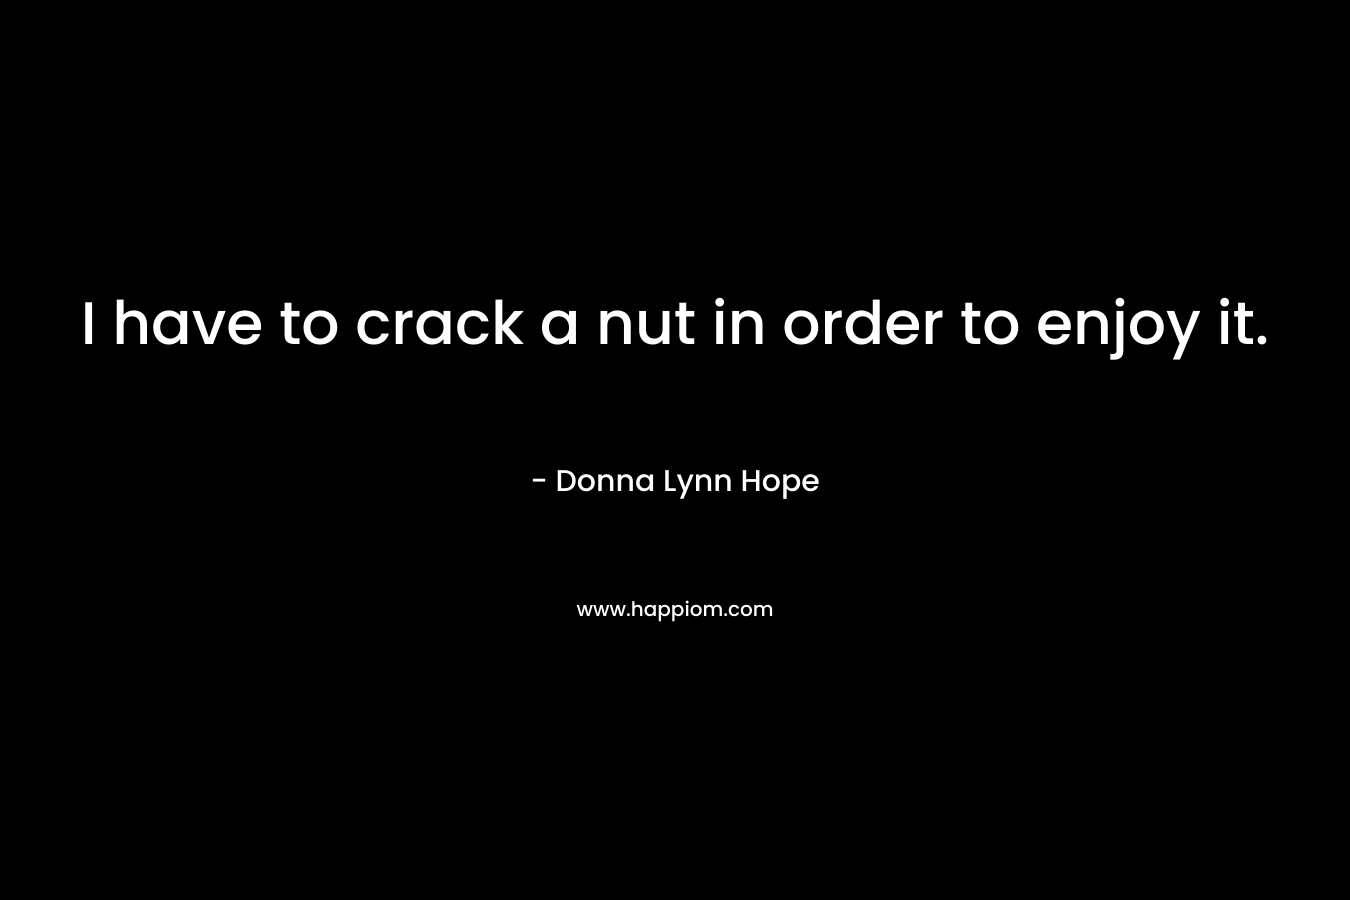 I have to crack a nut in order to enjoy it. – Donna Lynn Hope